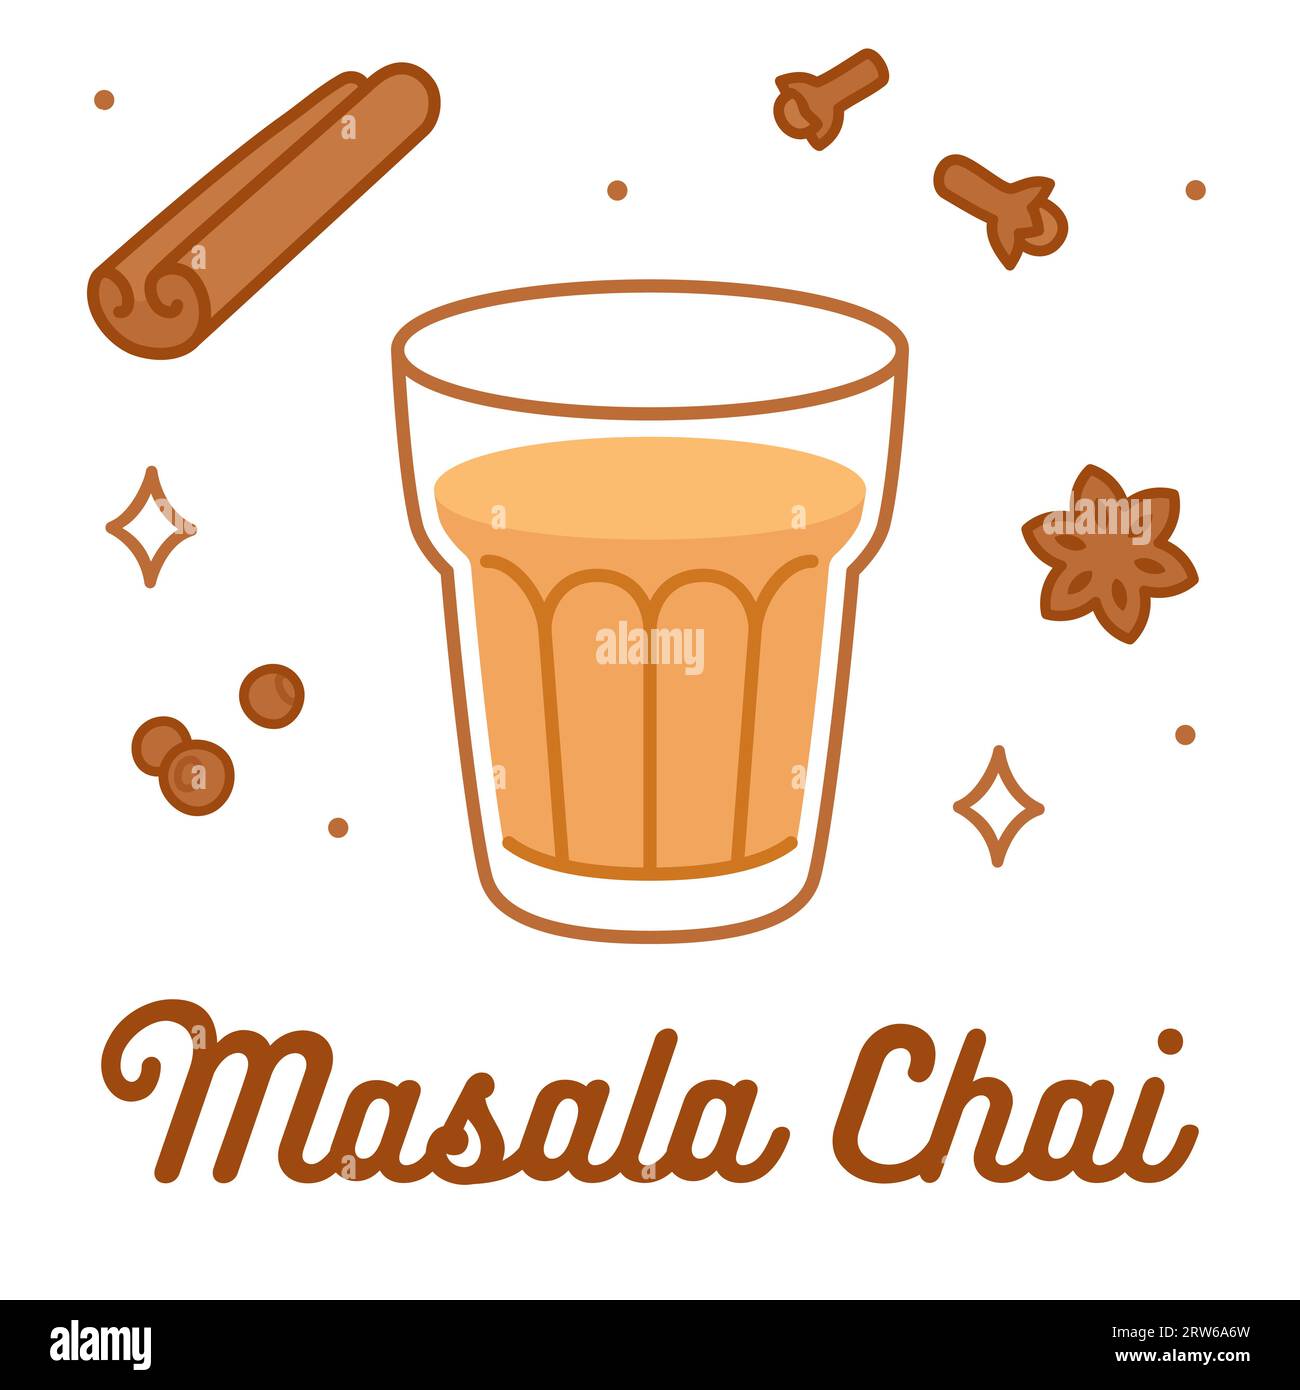 https://c8.alamy.com/comp/2RW6A6W/masala-chai-tea-doodle-drawing-hand-drawn-cartoon-glass-of-indian-tea-with-aromatic-spices-cinnamon-cloves-anise-and-pepper-vector-illustration-2RW6A6W.jpg